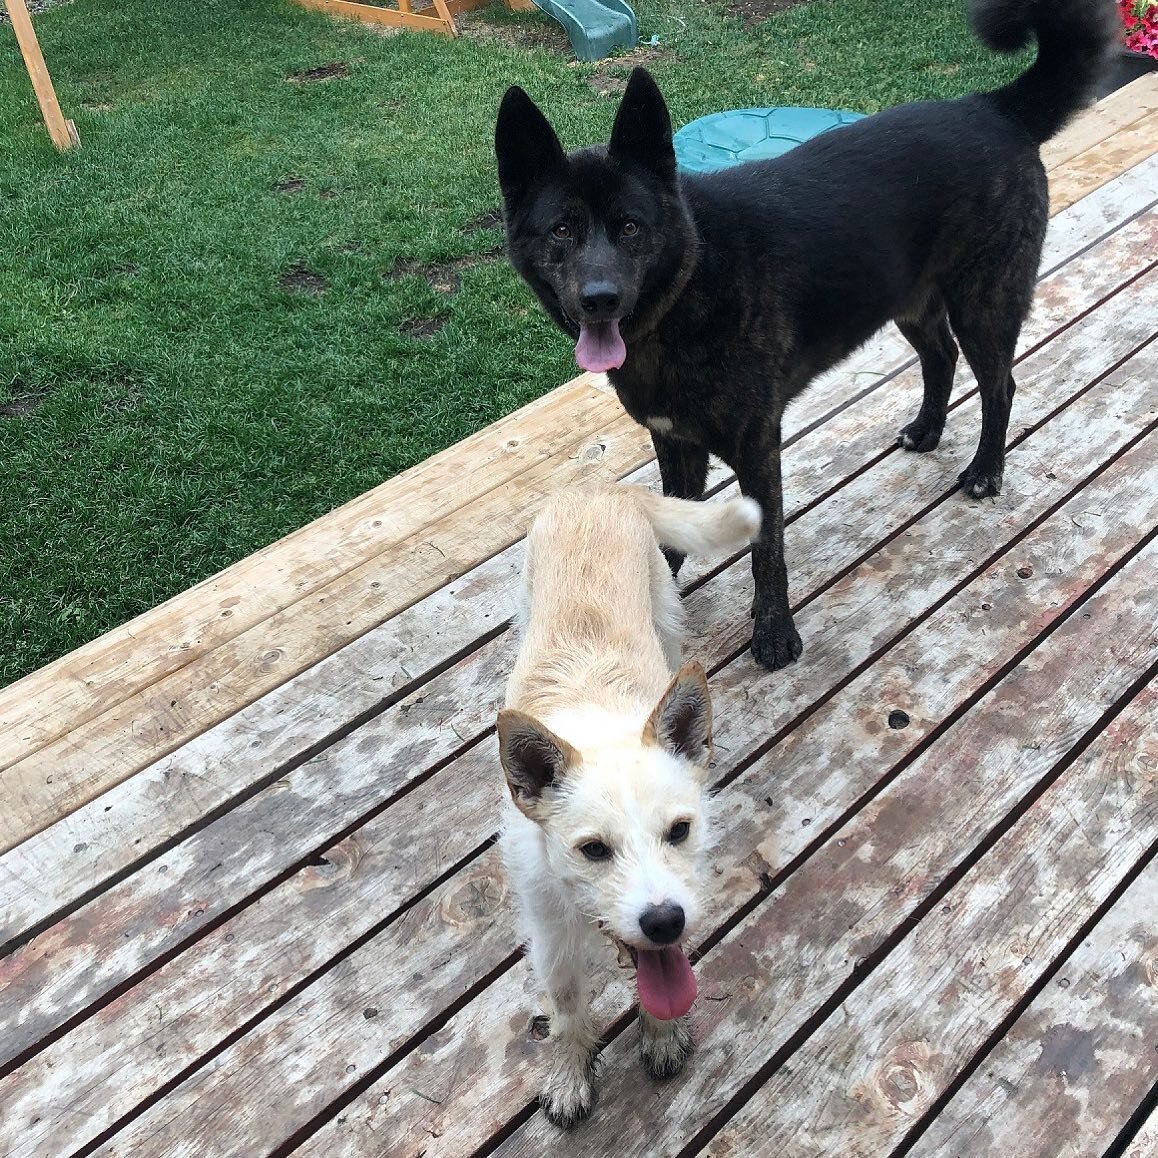 Bear and one of his besties -- his cousin, Lincoln. 

#dogs #dogsofinstagram #bear #lovedogs #authorsofinstagram #authorslovedogs #cousins #besties #bff